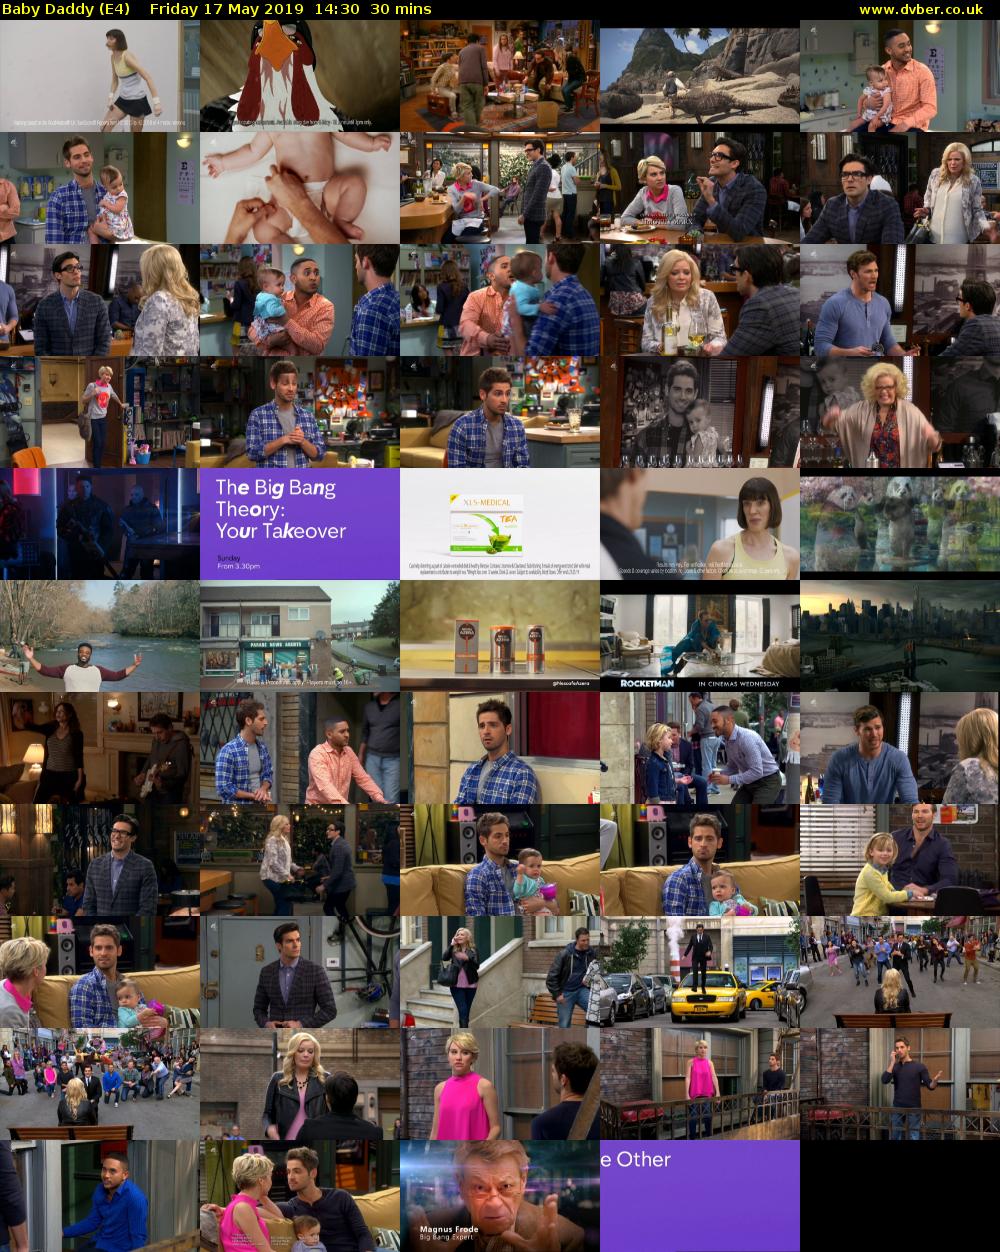 Baby Daddy (E4) Friday 17 May 2019 14:30 - 15:00